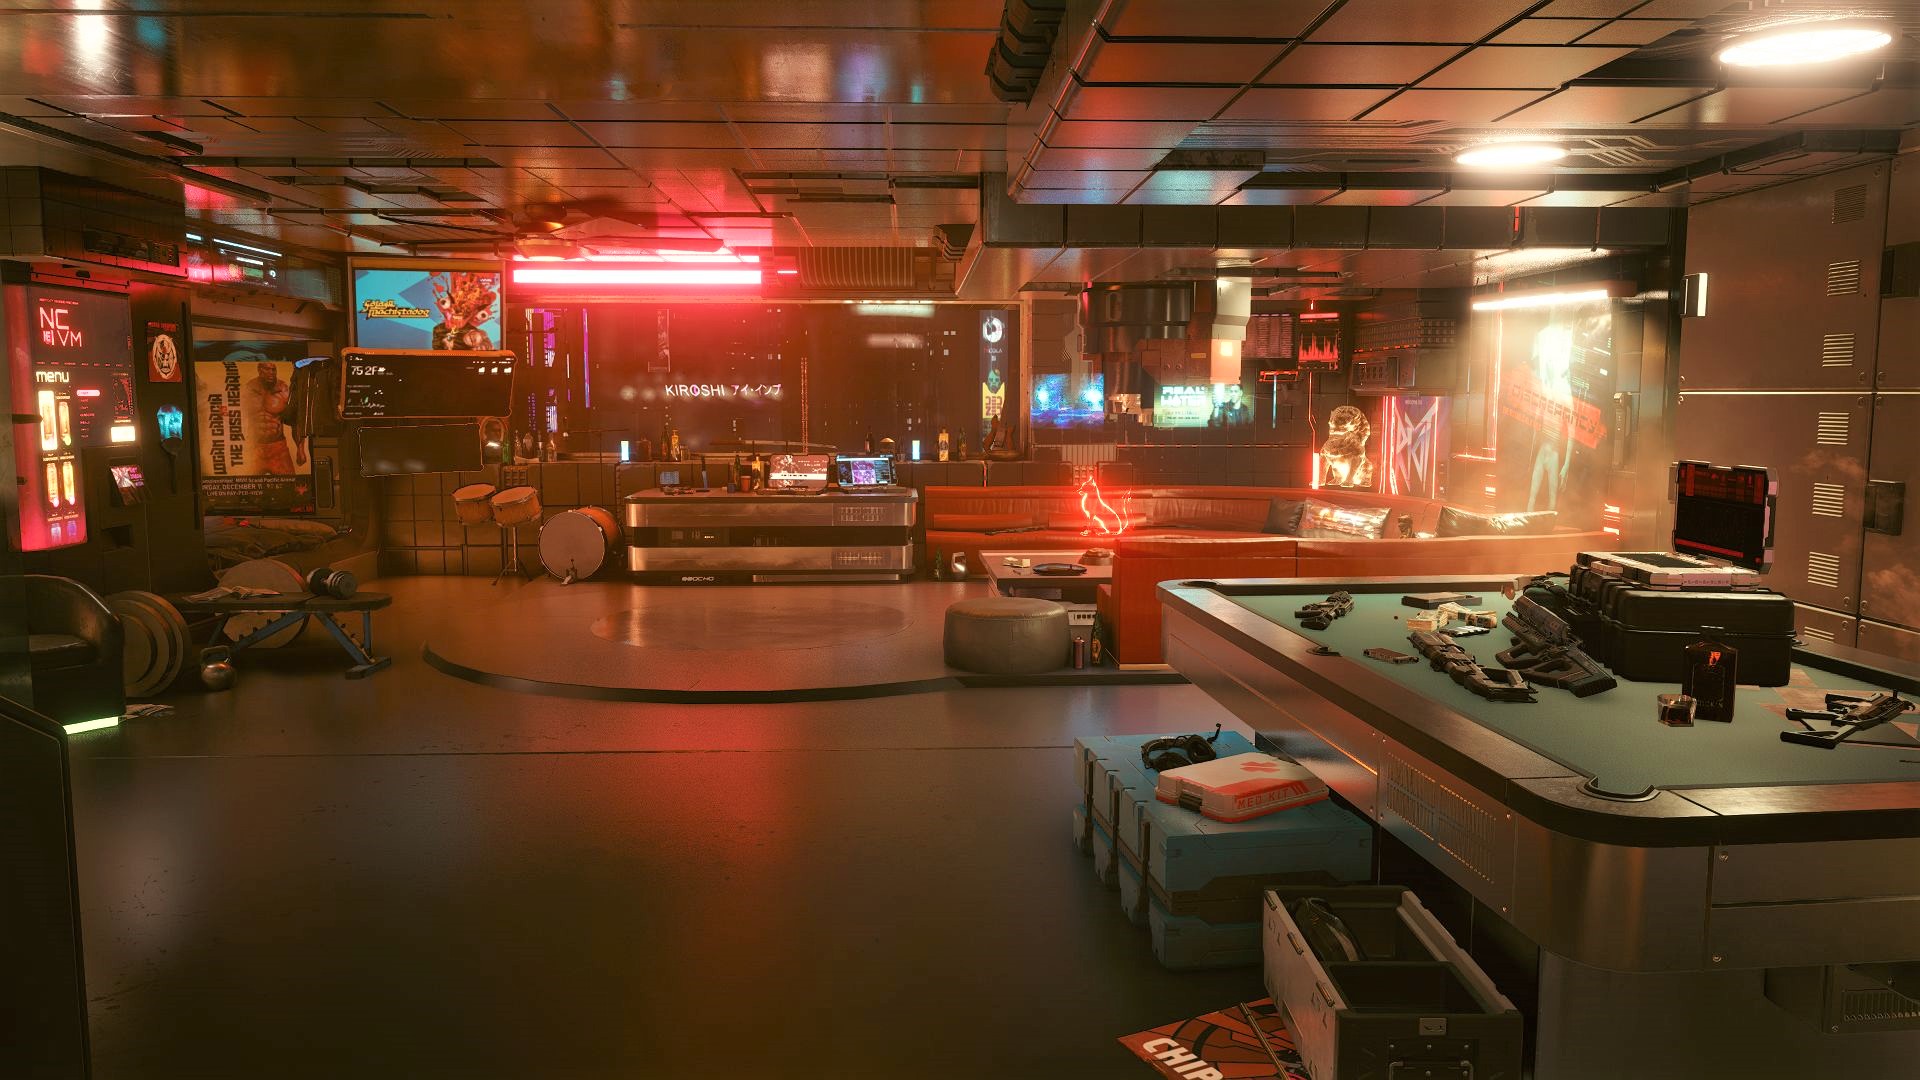 A Cyberpunk 2077 modder is giving V’s apartment some dazzling lifepath overhauls